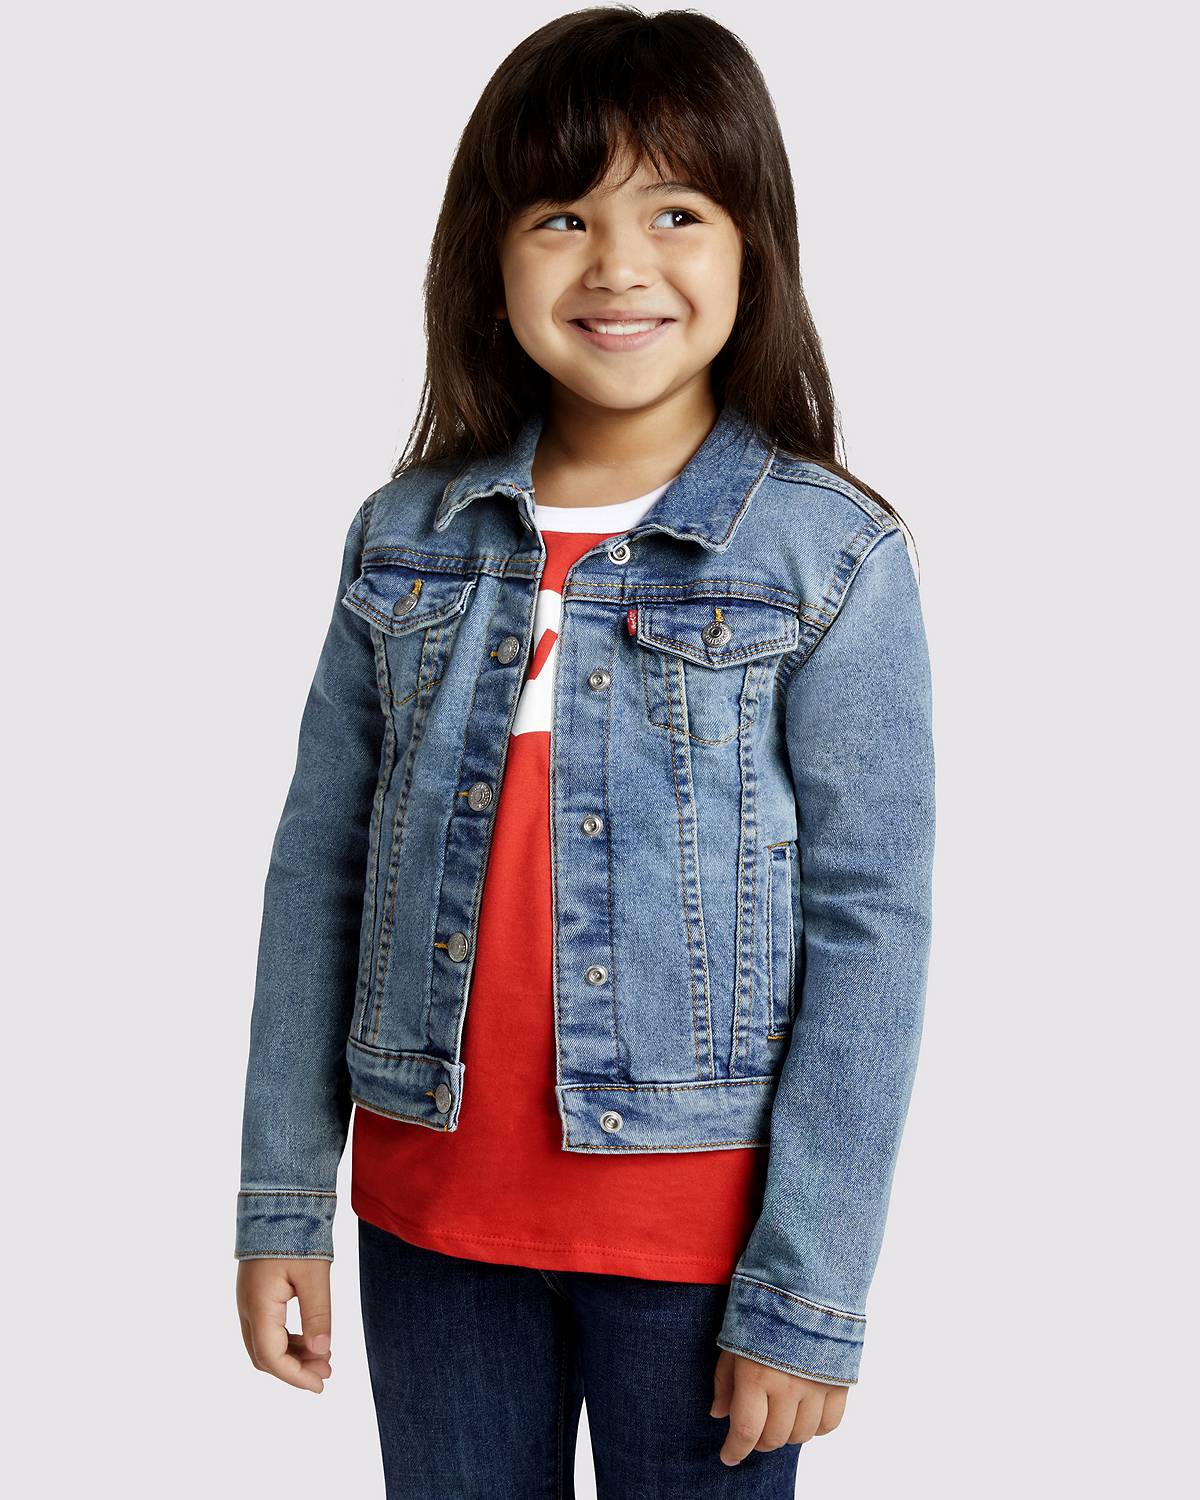 Little girl model wearing jacket and red tee.